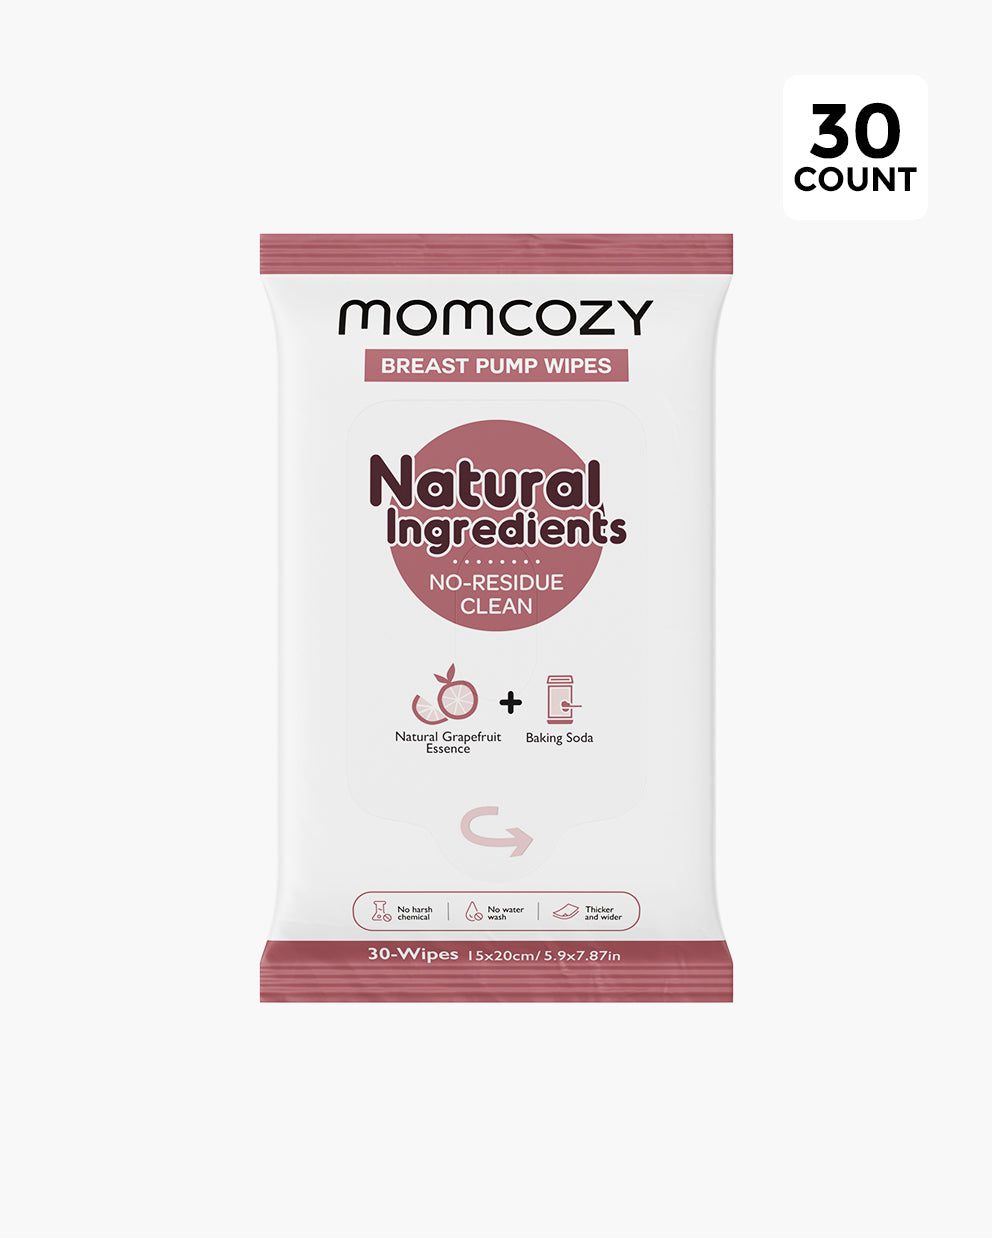 Momcozy Stands Up for European Mums with its Remove